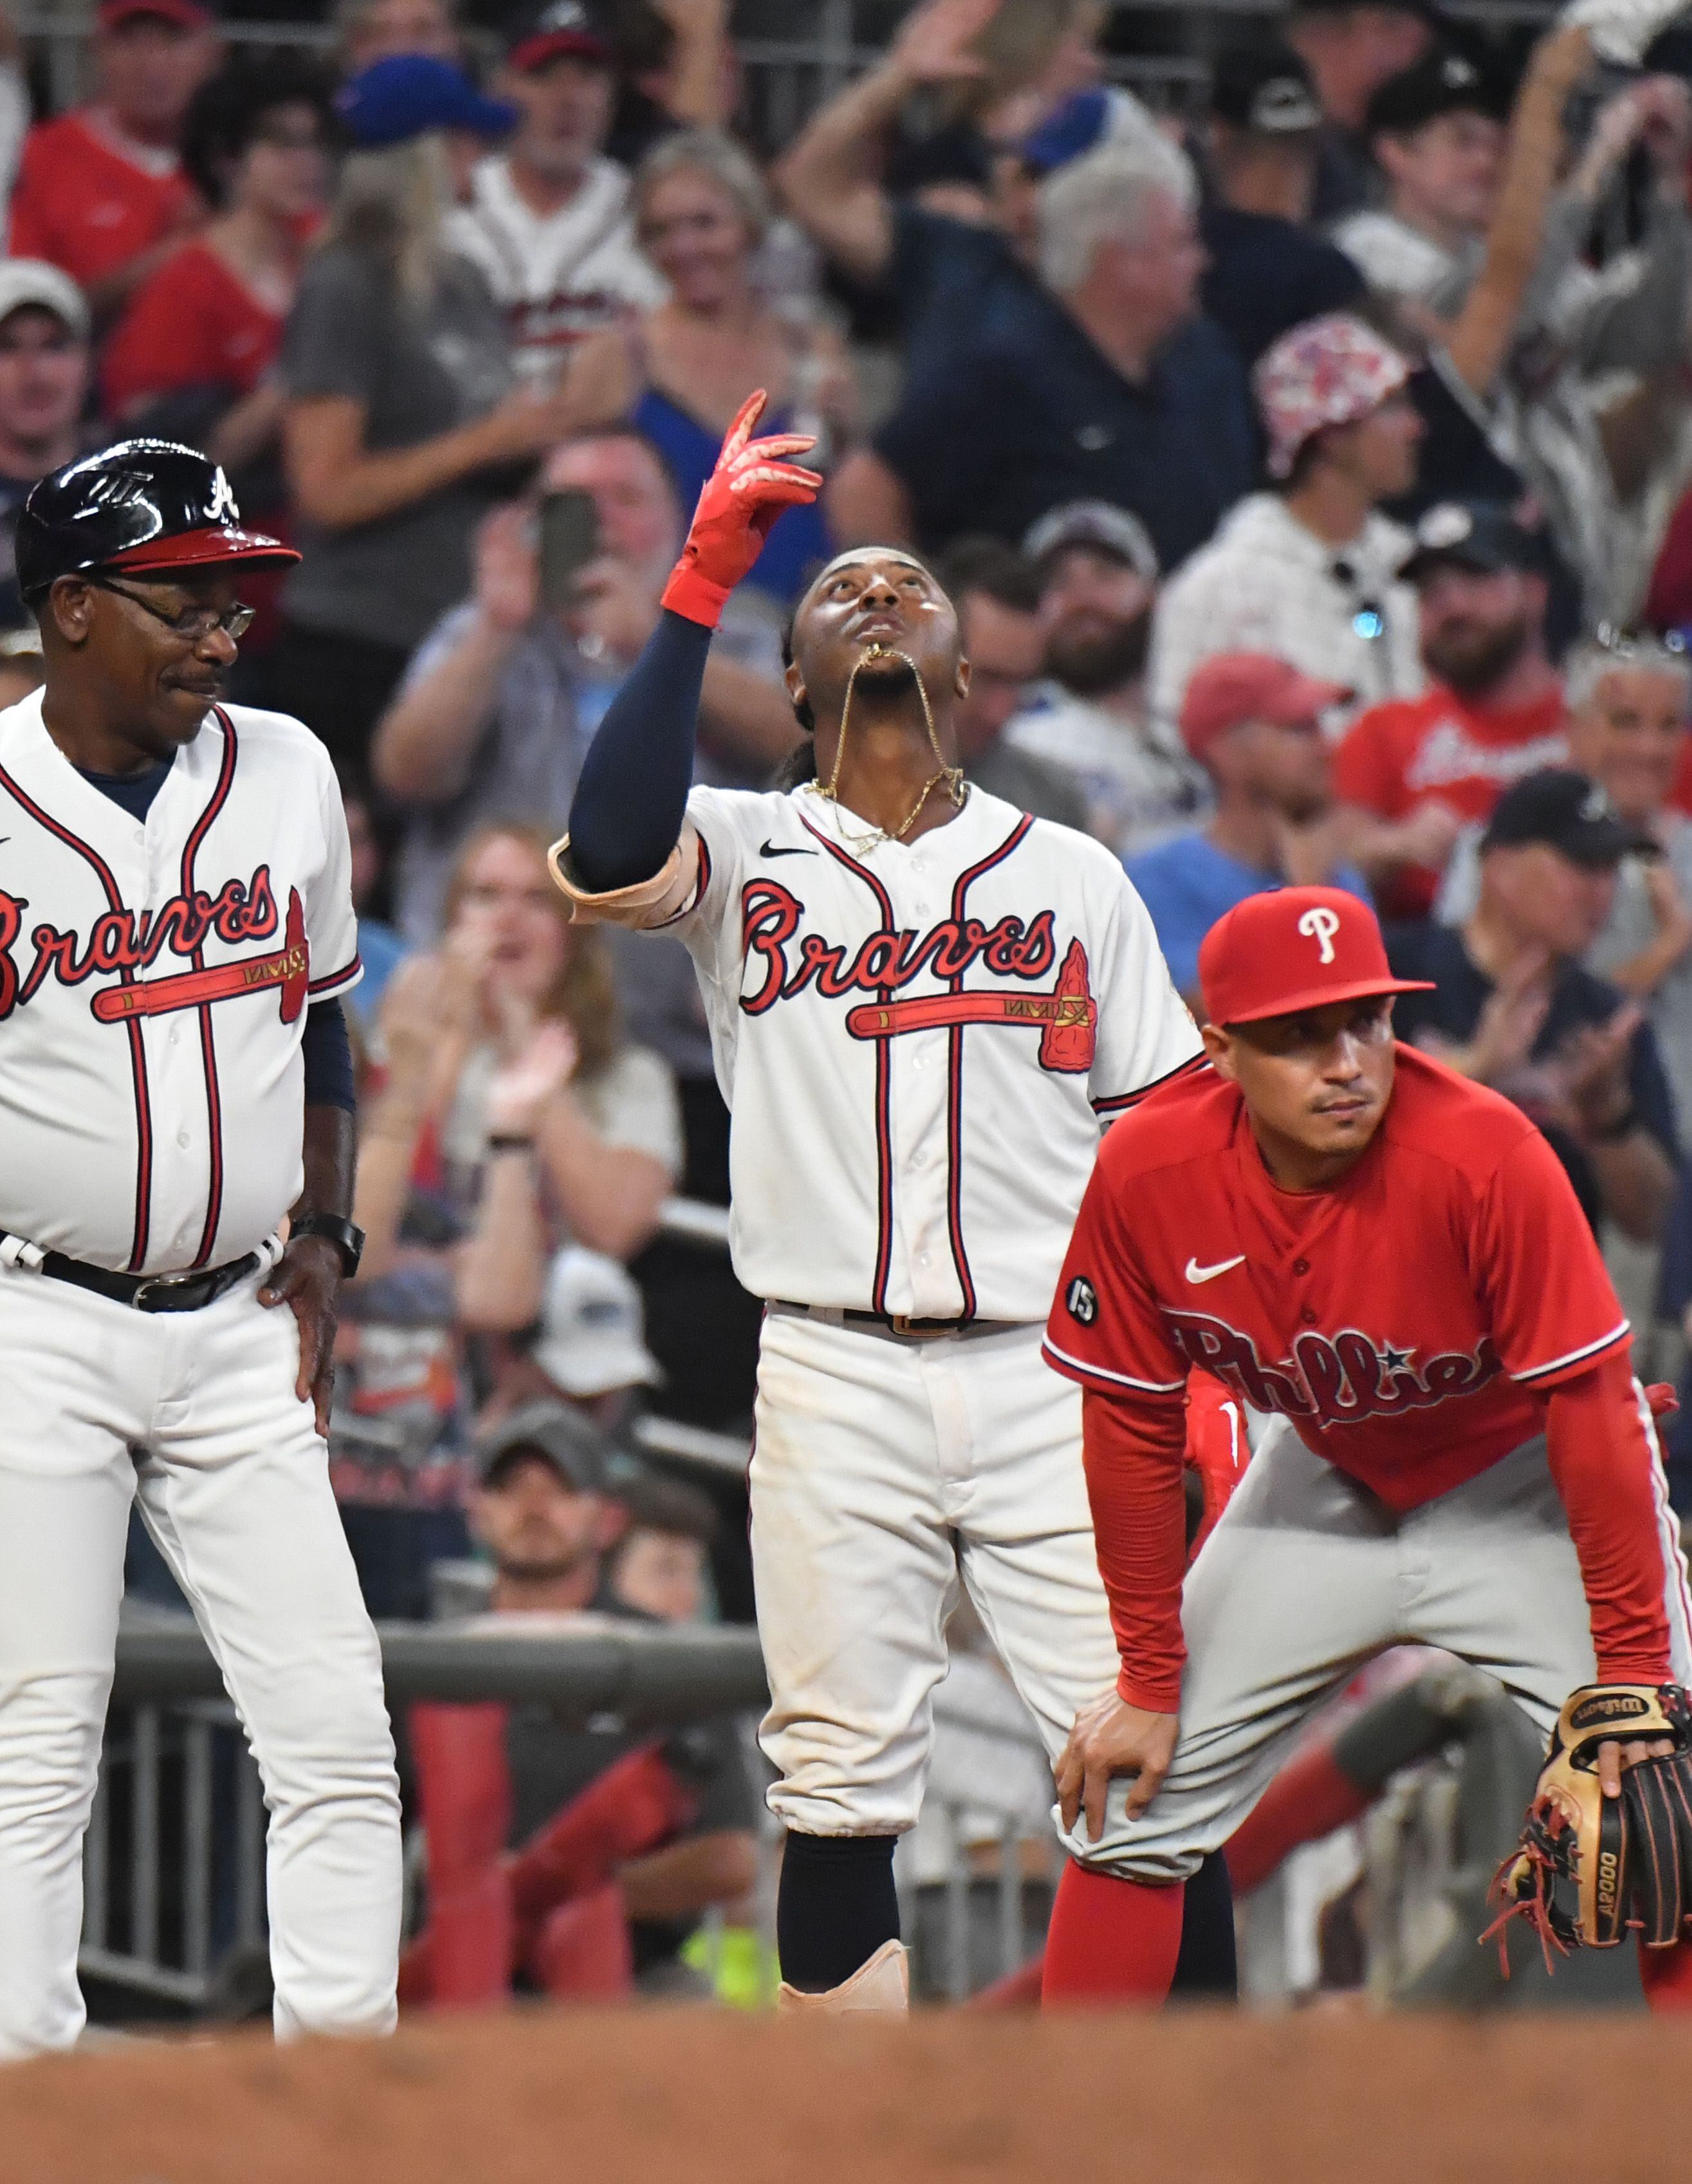 FOX Sports: MLB on X: THREE-PEAT! For the 3rd year in a row the Atlanta @ Braves are NL East Champions!  / X